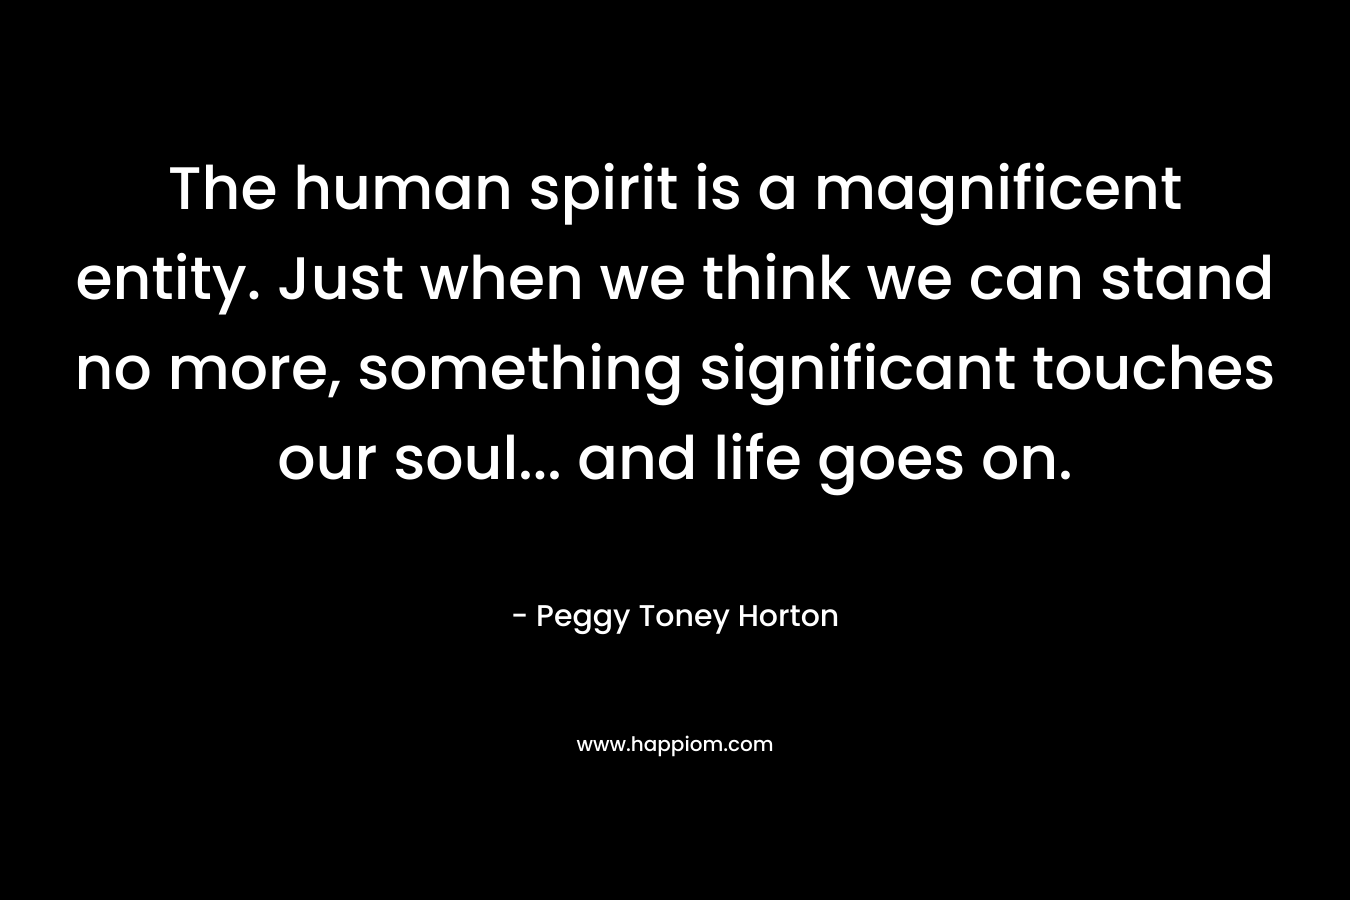 The human spirit is a magnificent entity. Just when we think we can stand no more, something significant touches our soul... and life goes on.